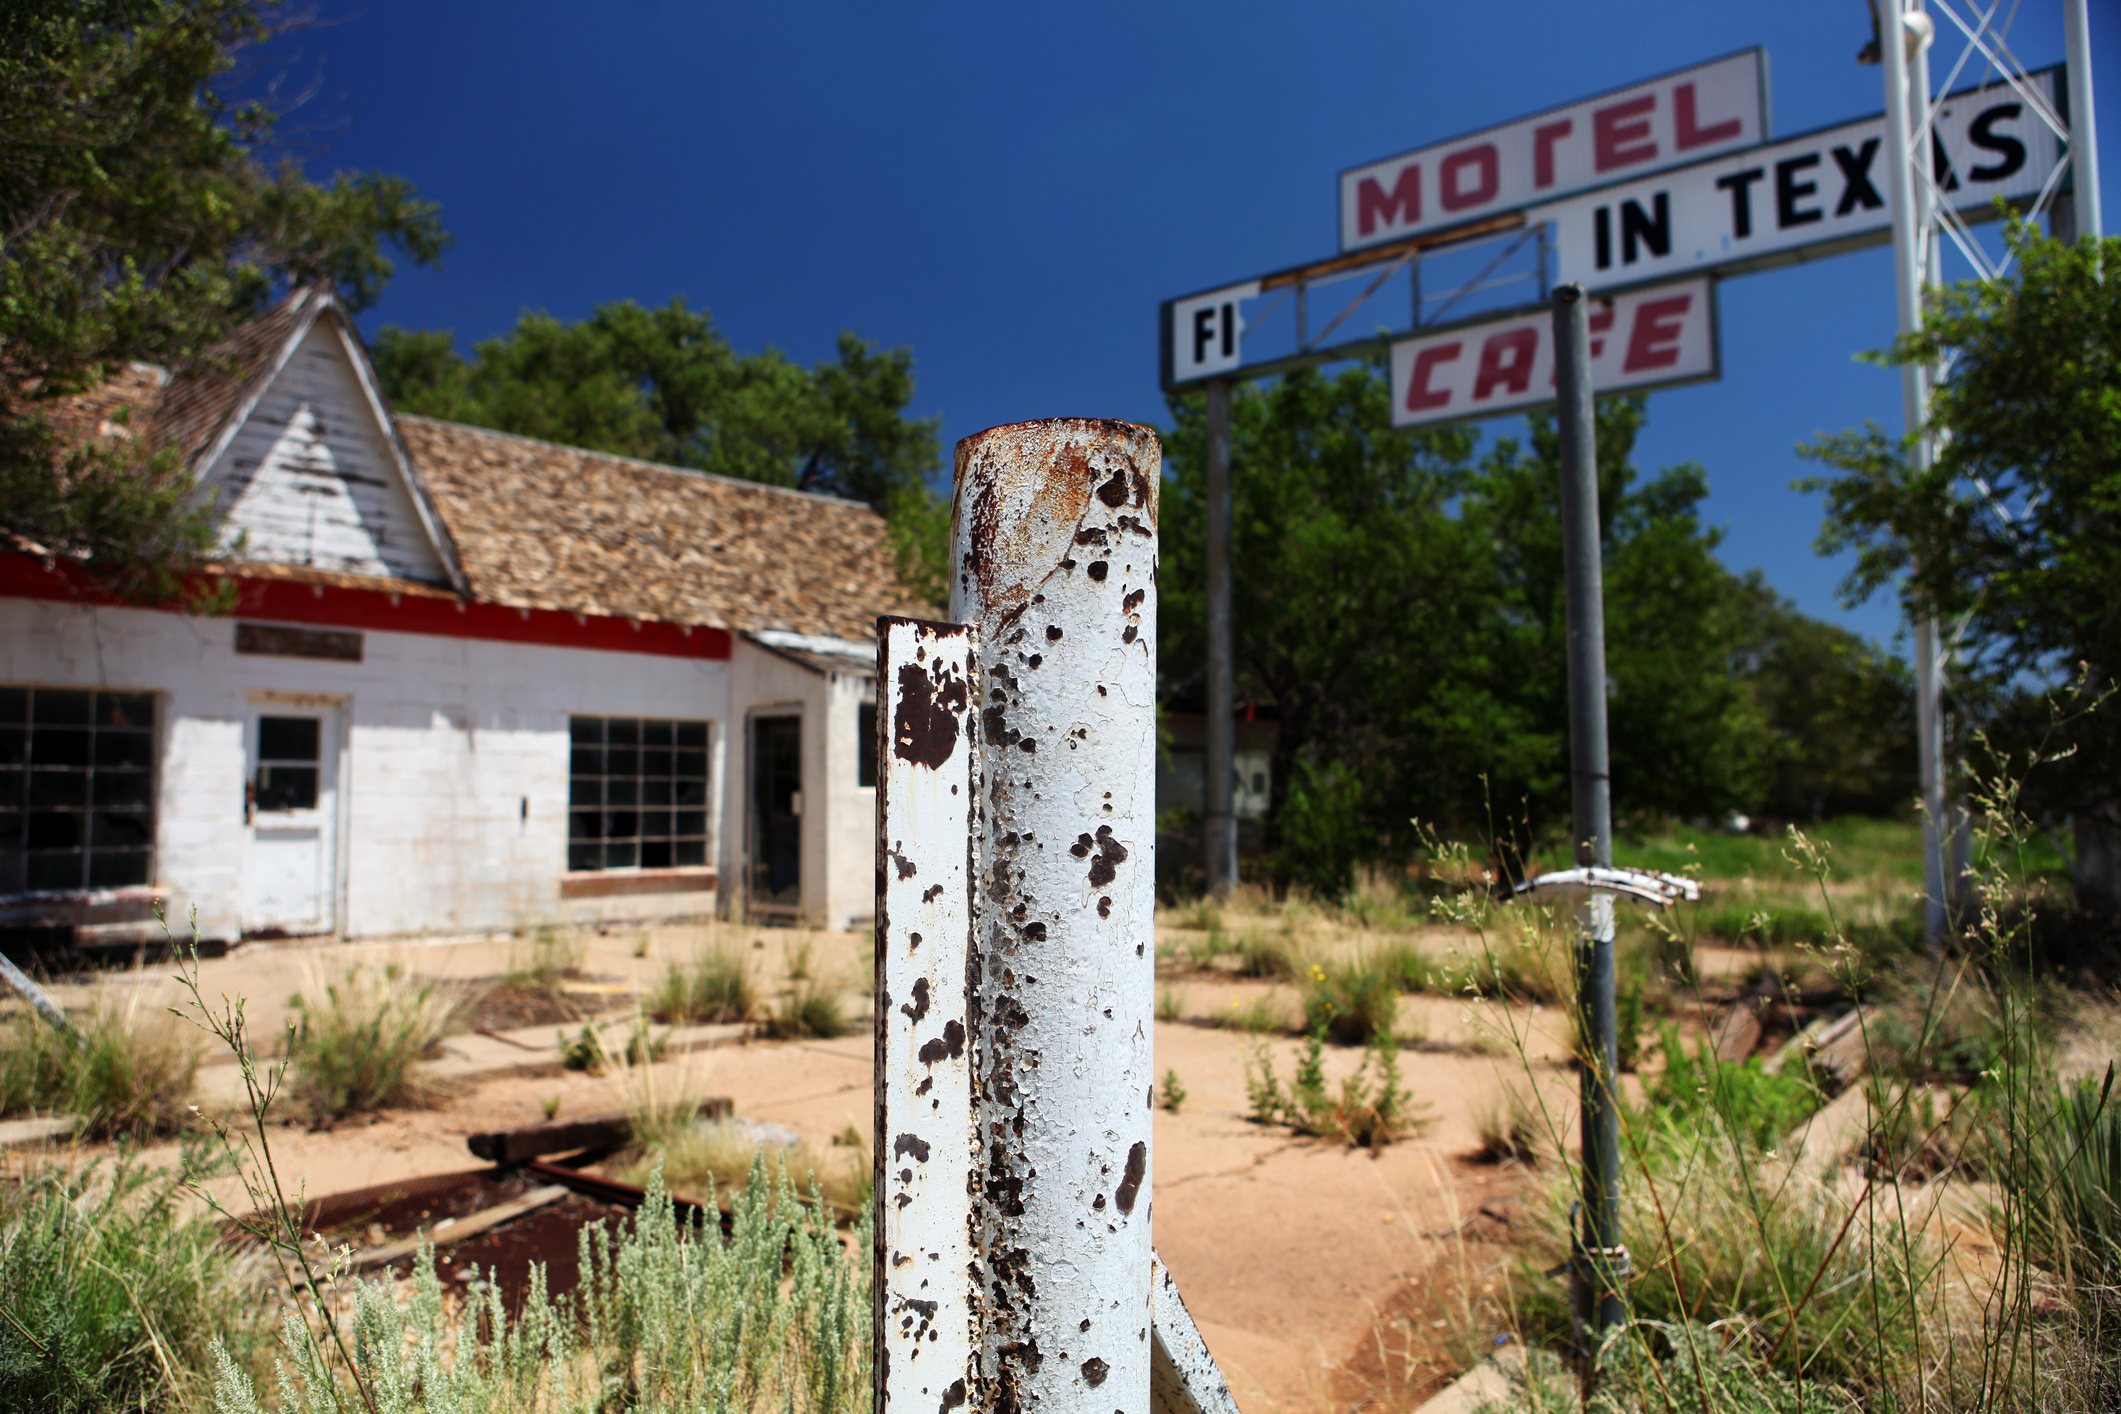 Abandoned roadside motel and cafe with weathered signs, overgrown with vegetation